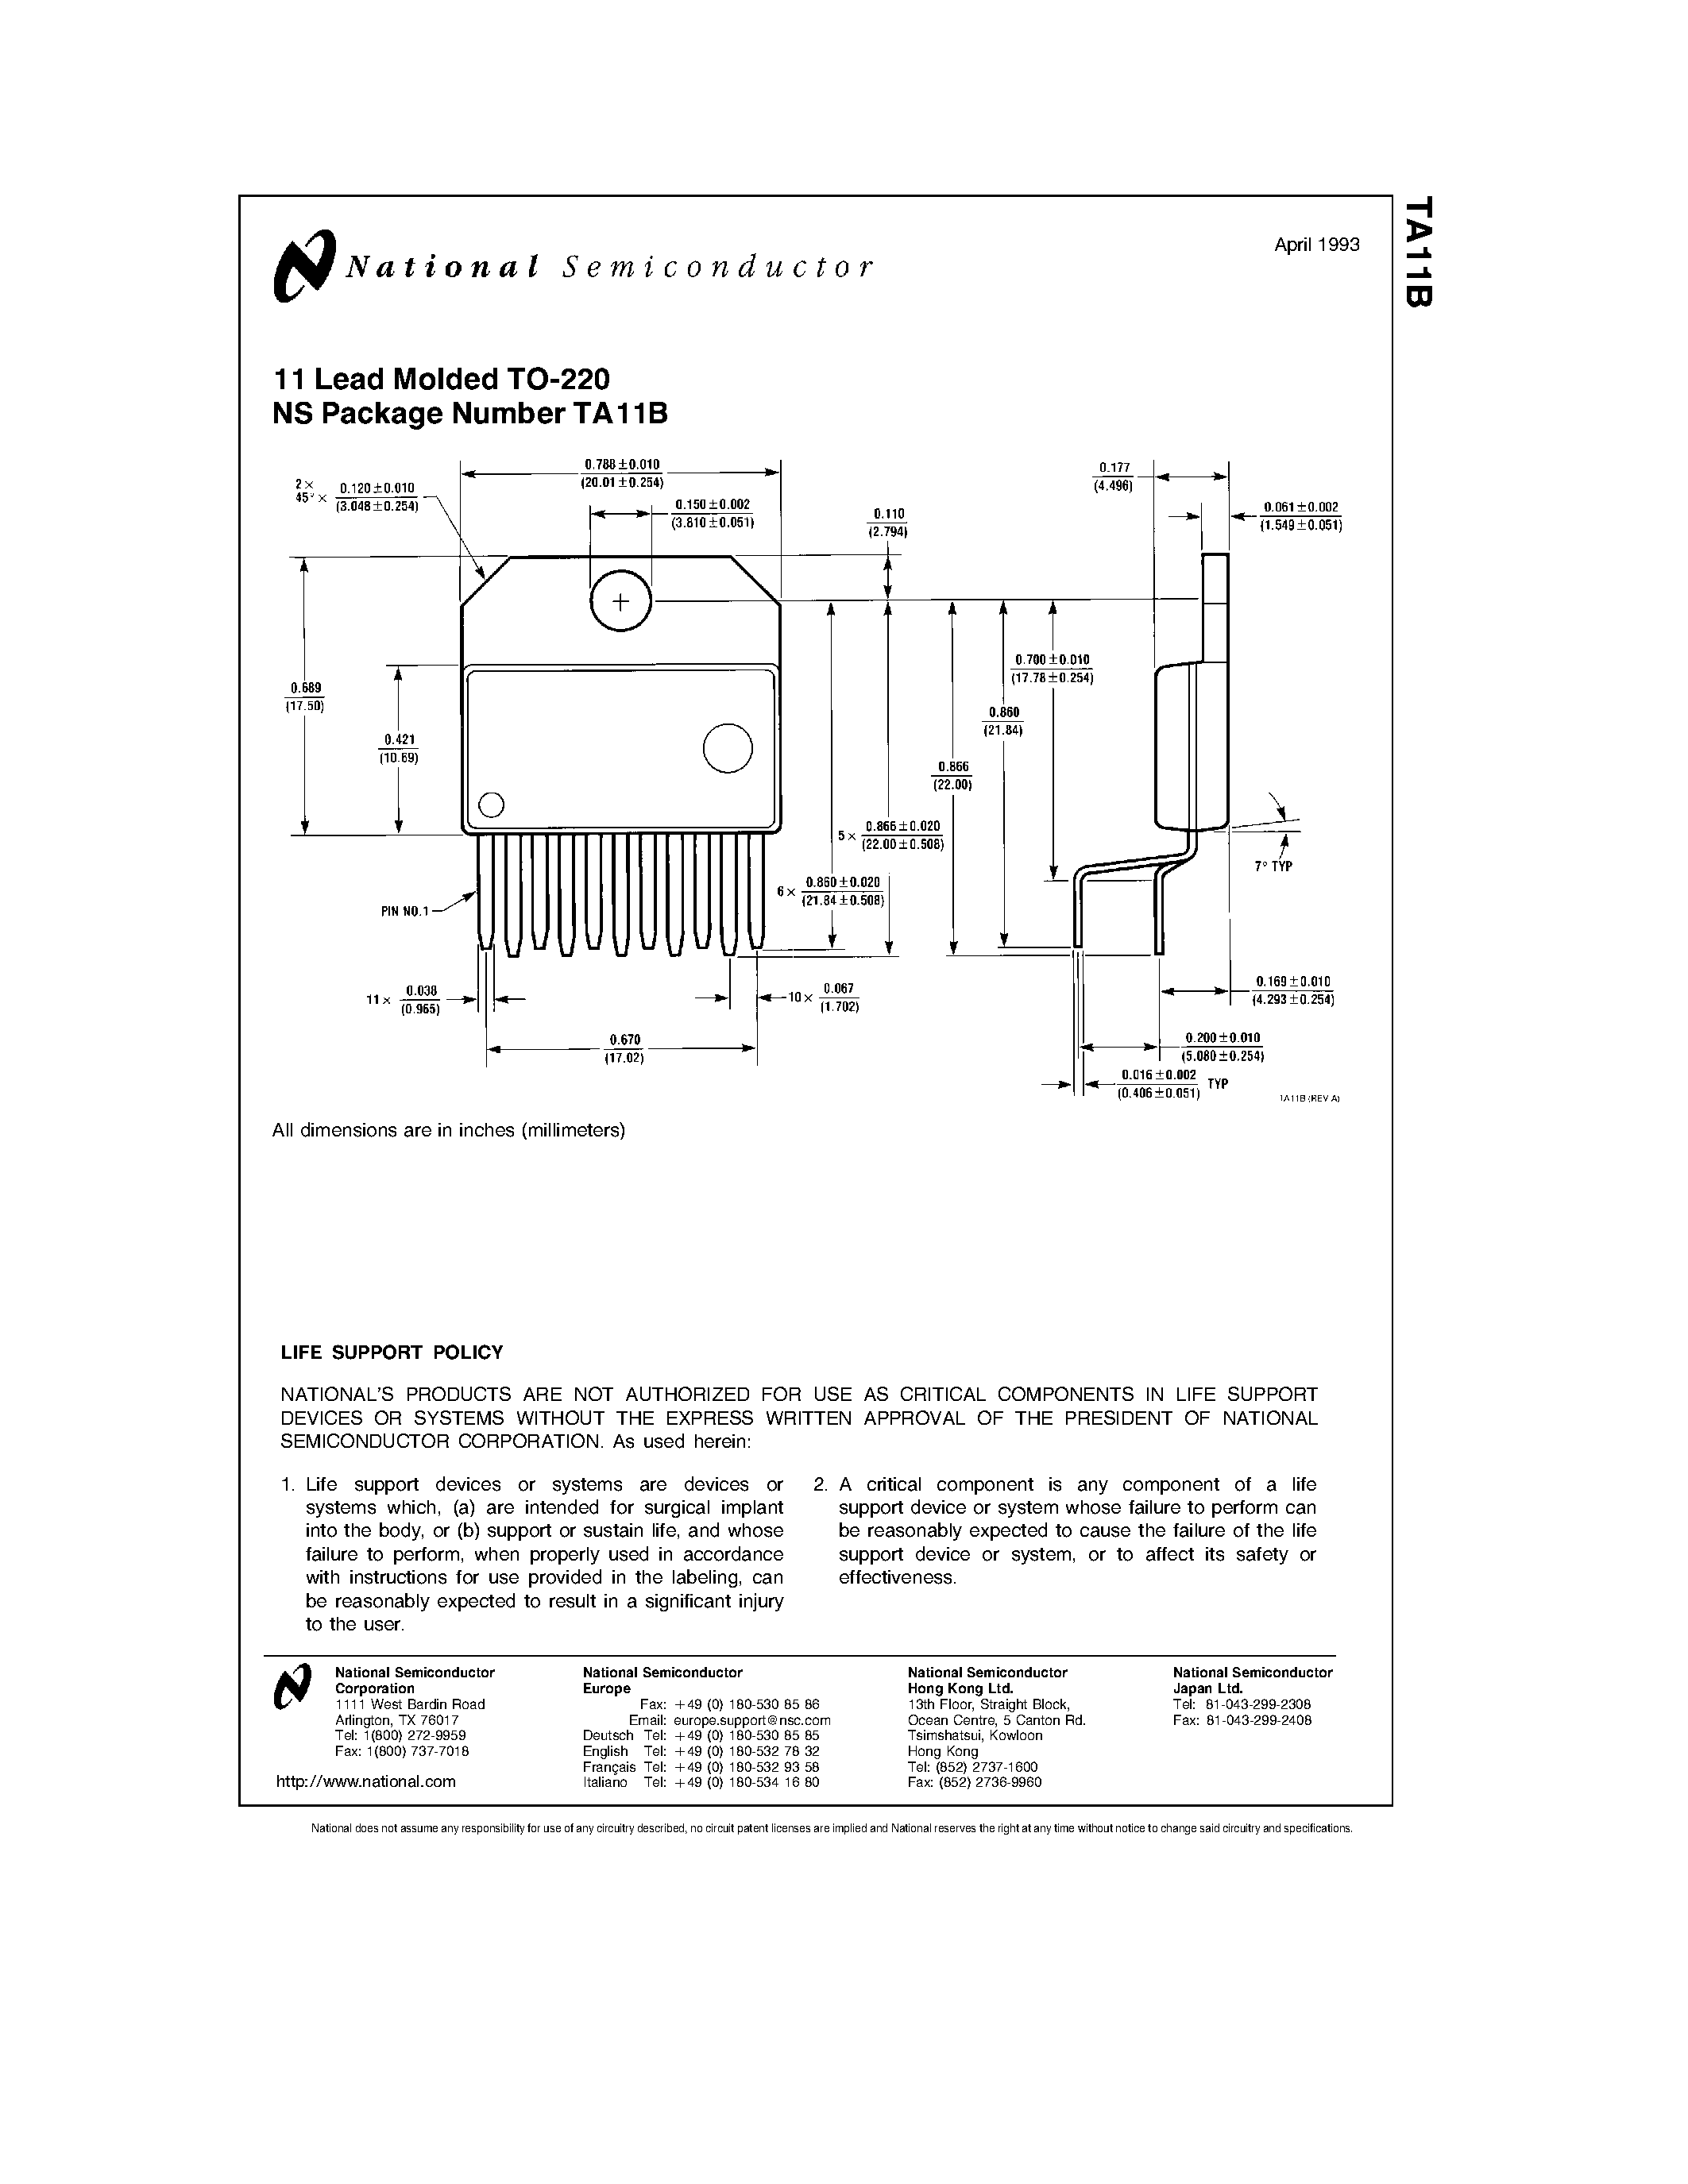 Datasheet TA11B - 11 Lead Molded TO-220 page 1